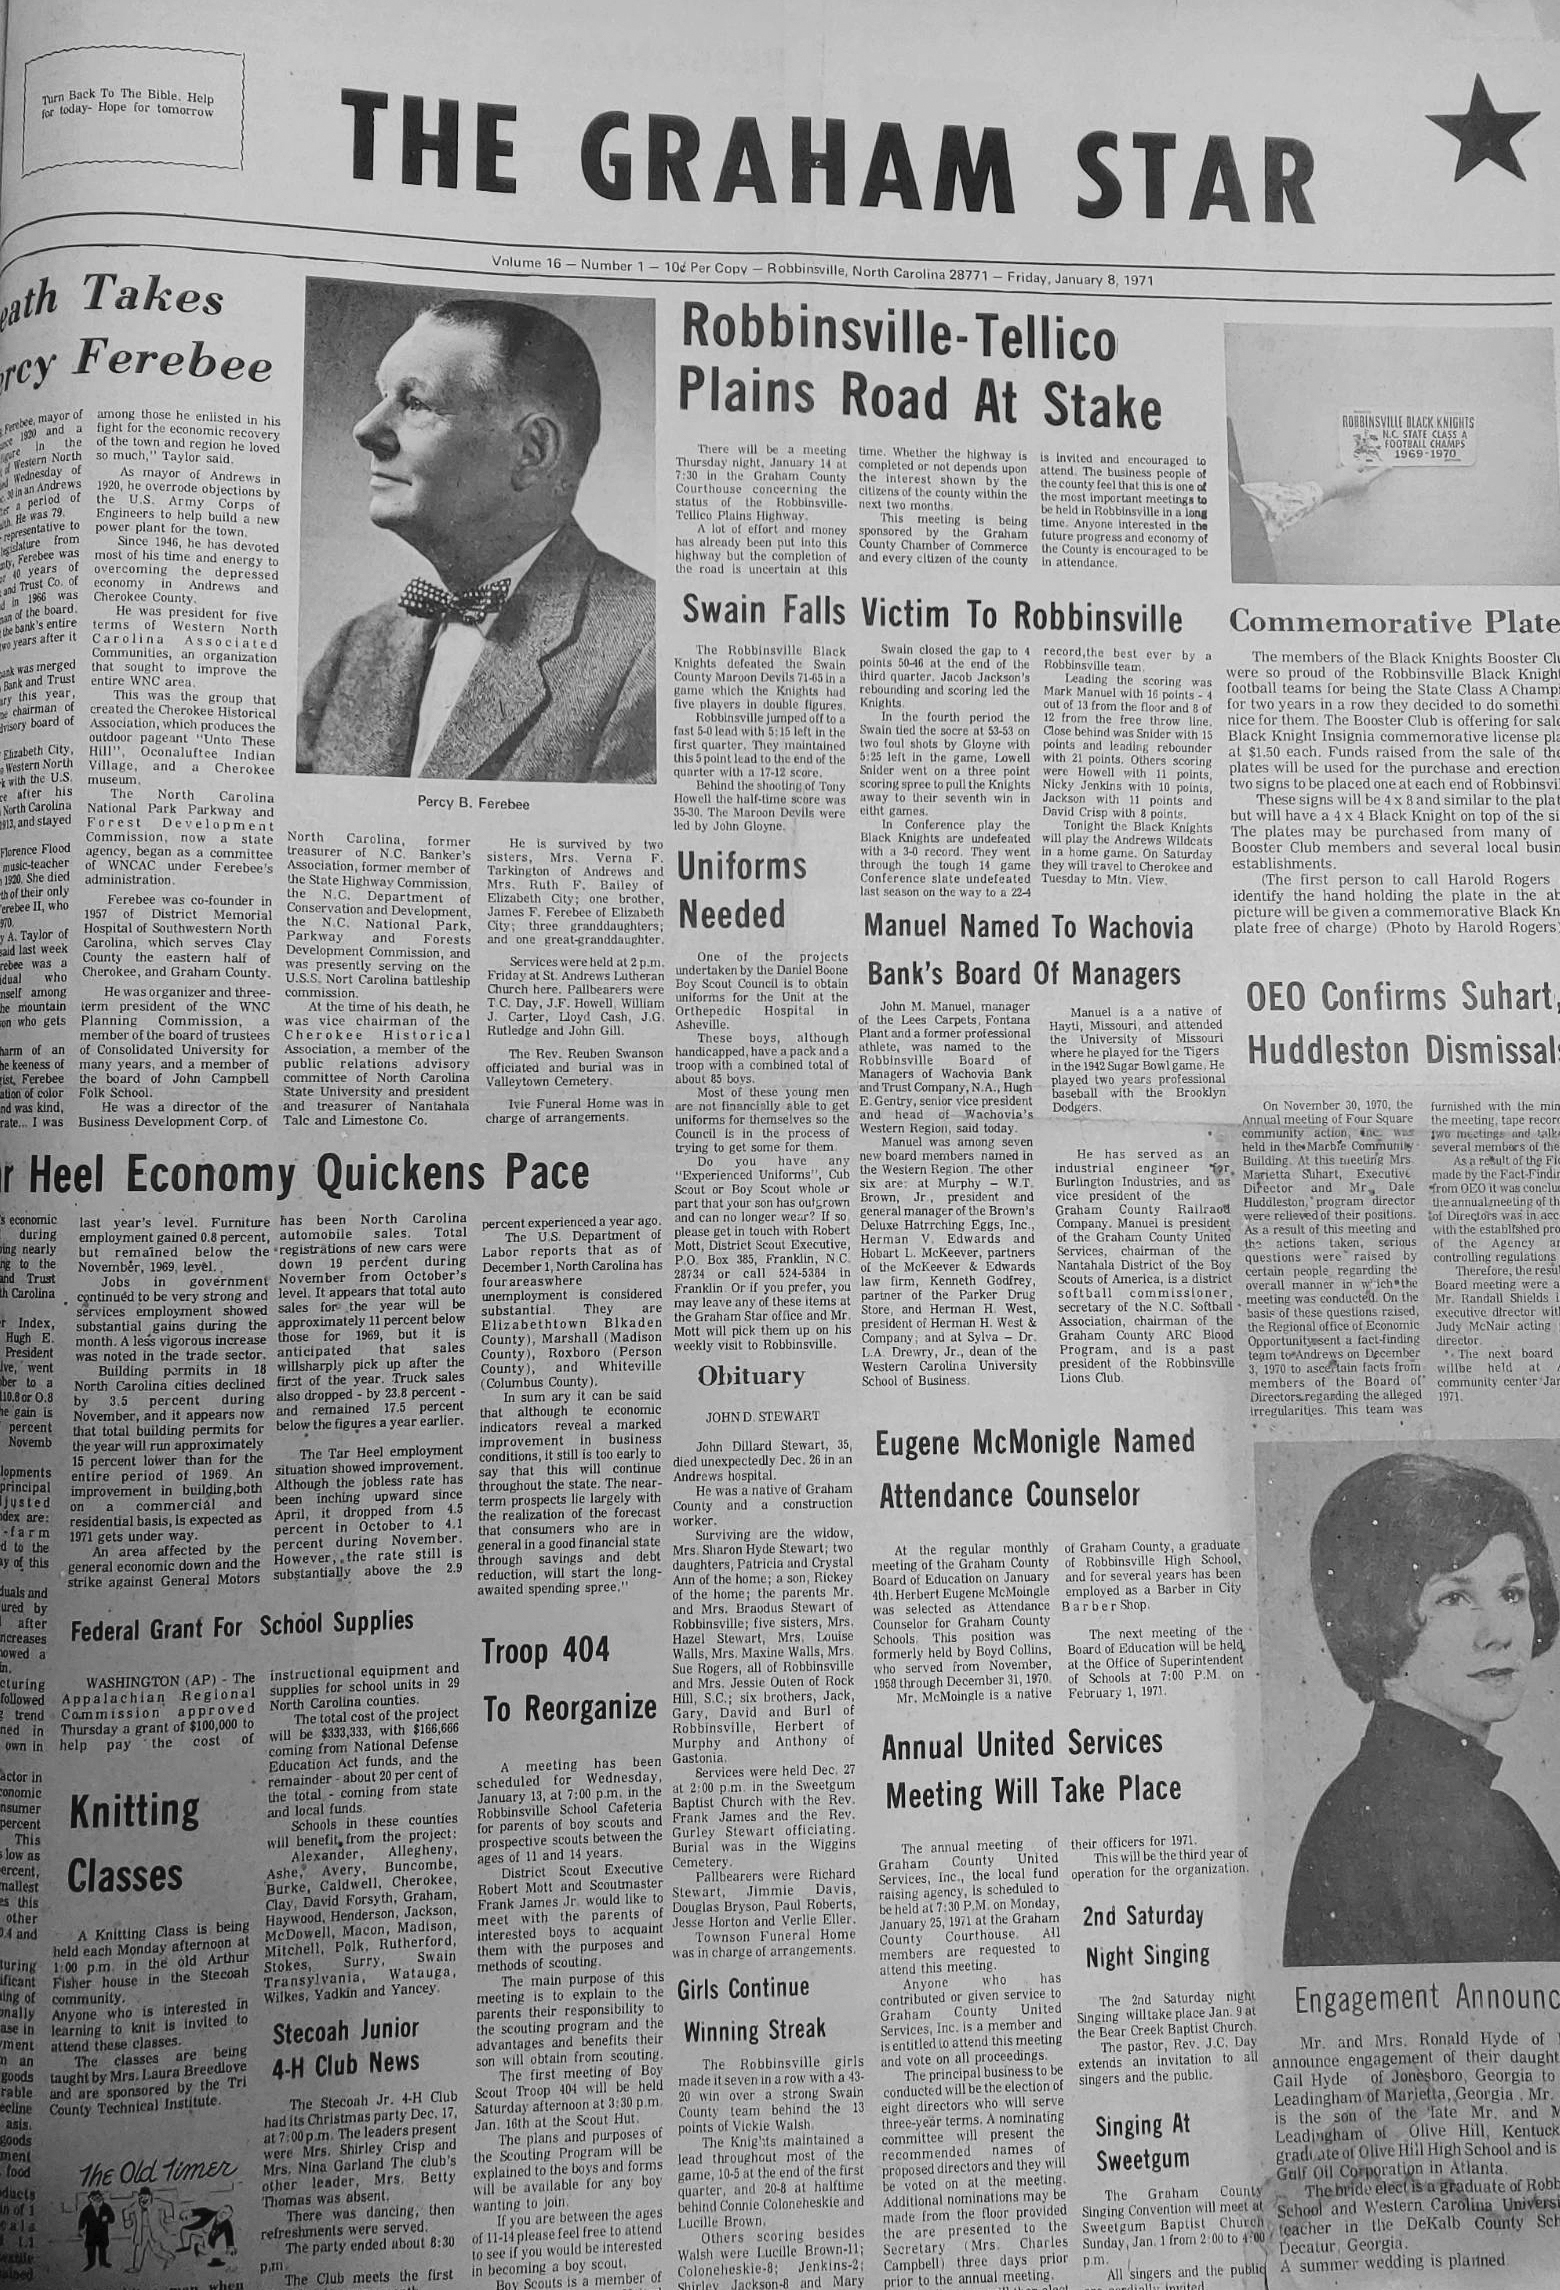 The Graham Star's front page from 50 years ago (Jan. 8, 1971).